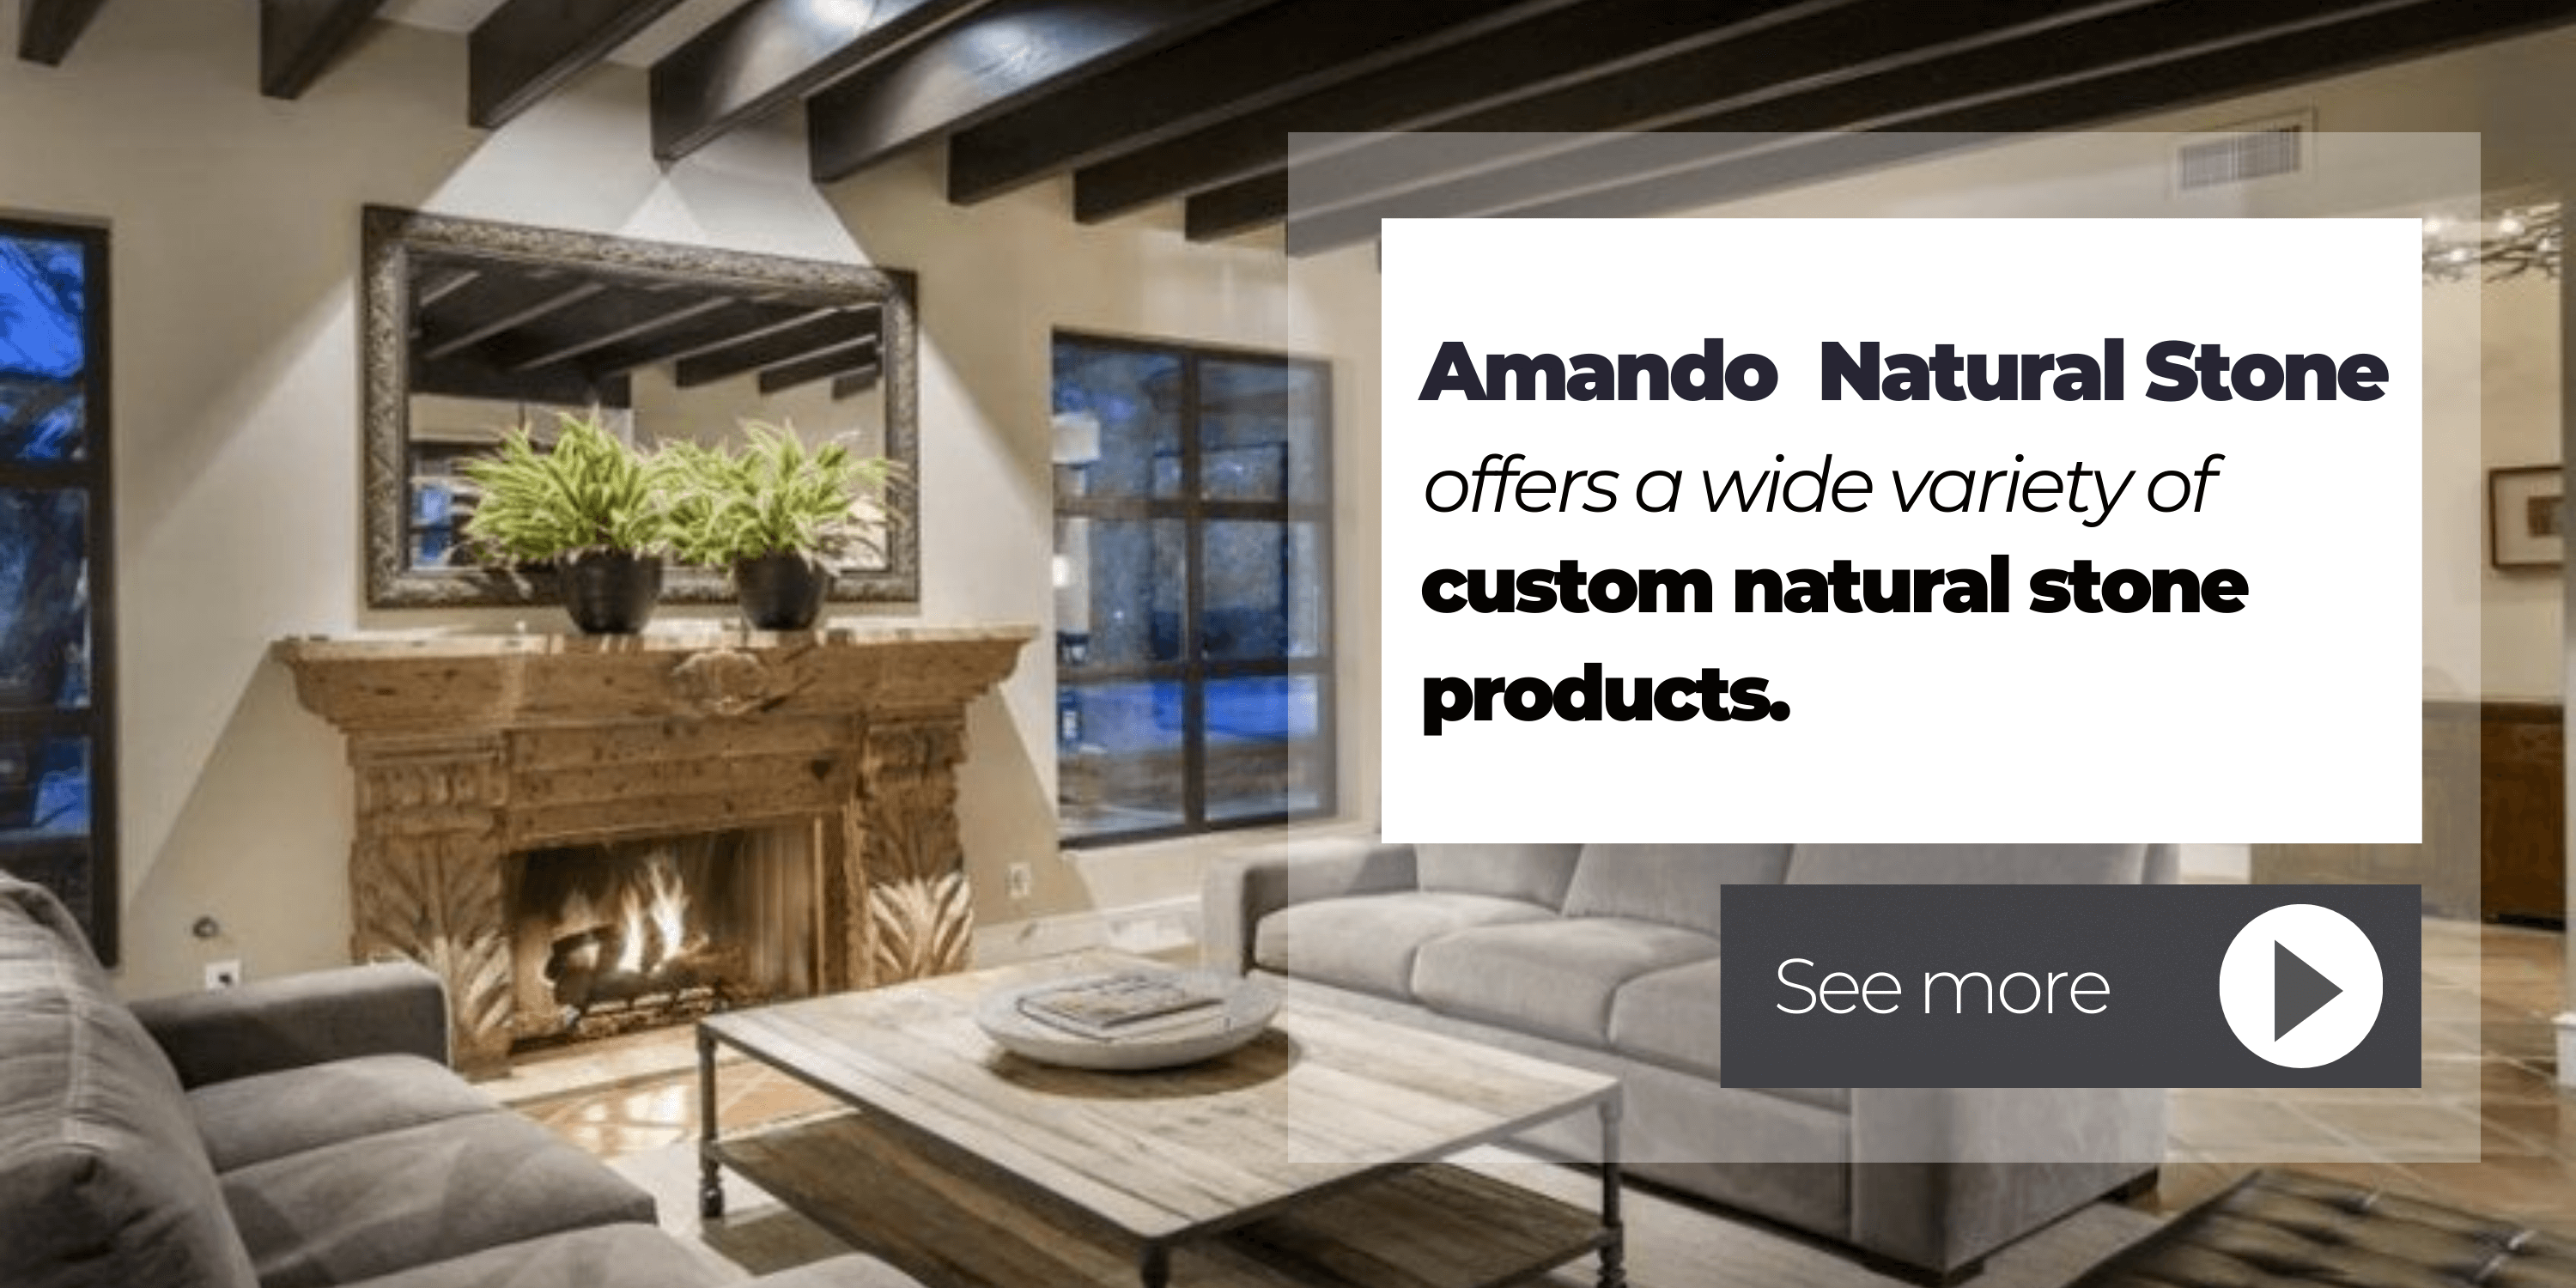 Custom amando natural stone fireplace Vancouver Canada supplier products 